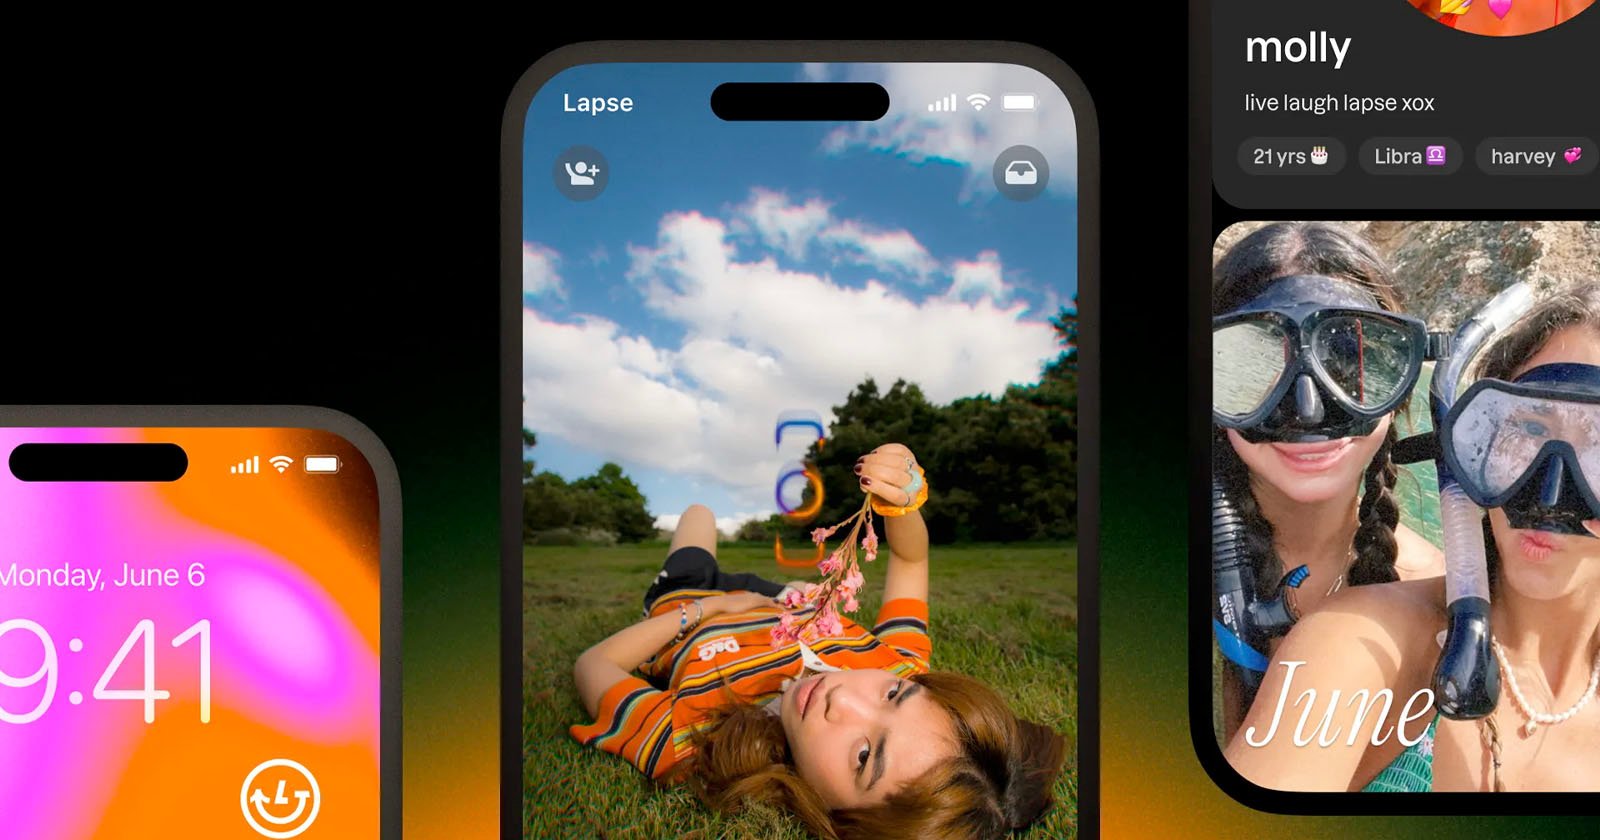 App That Turns Your Phone into an Old-School Camera Raises $30M